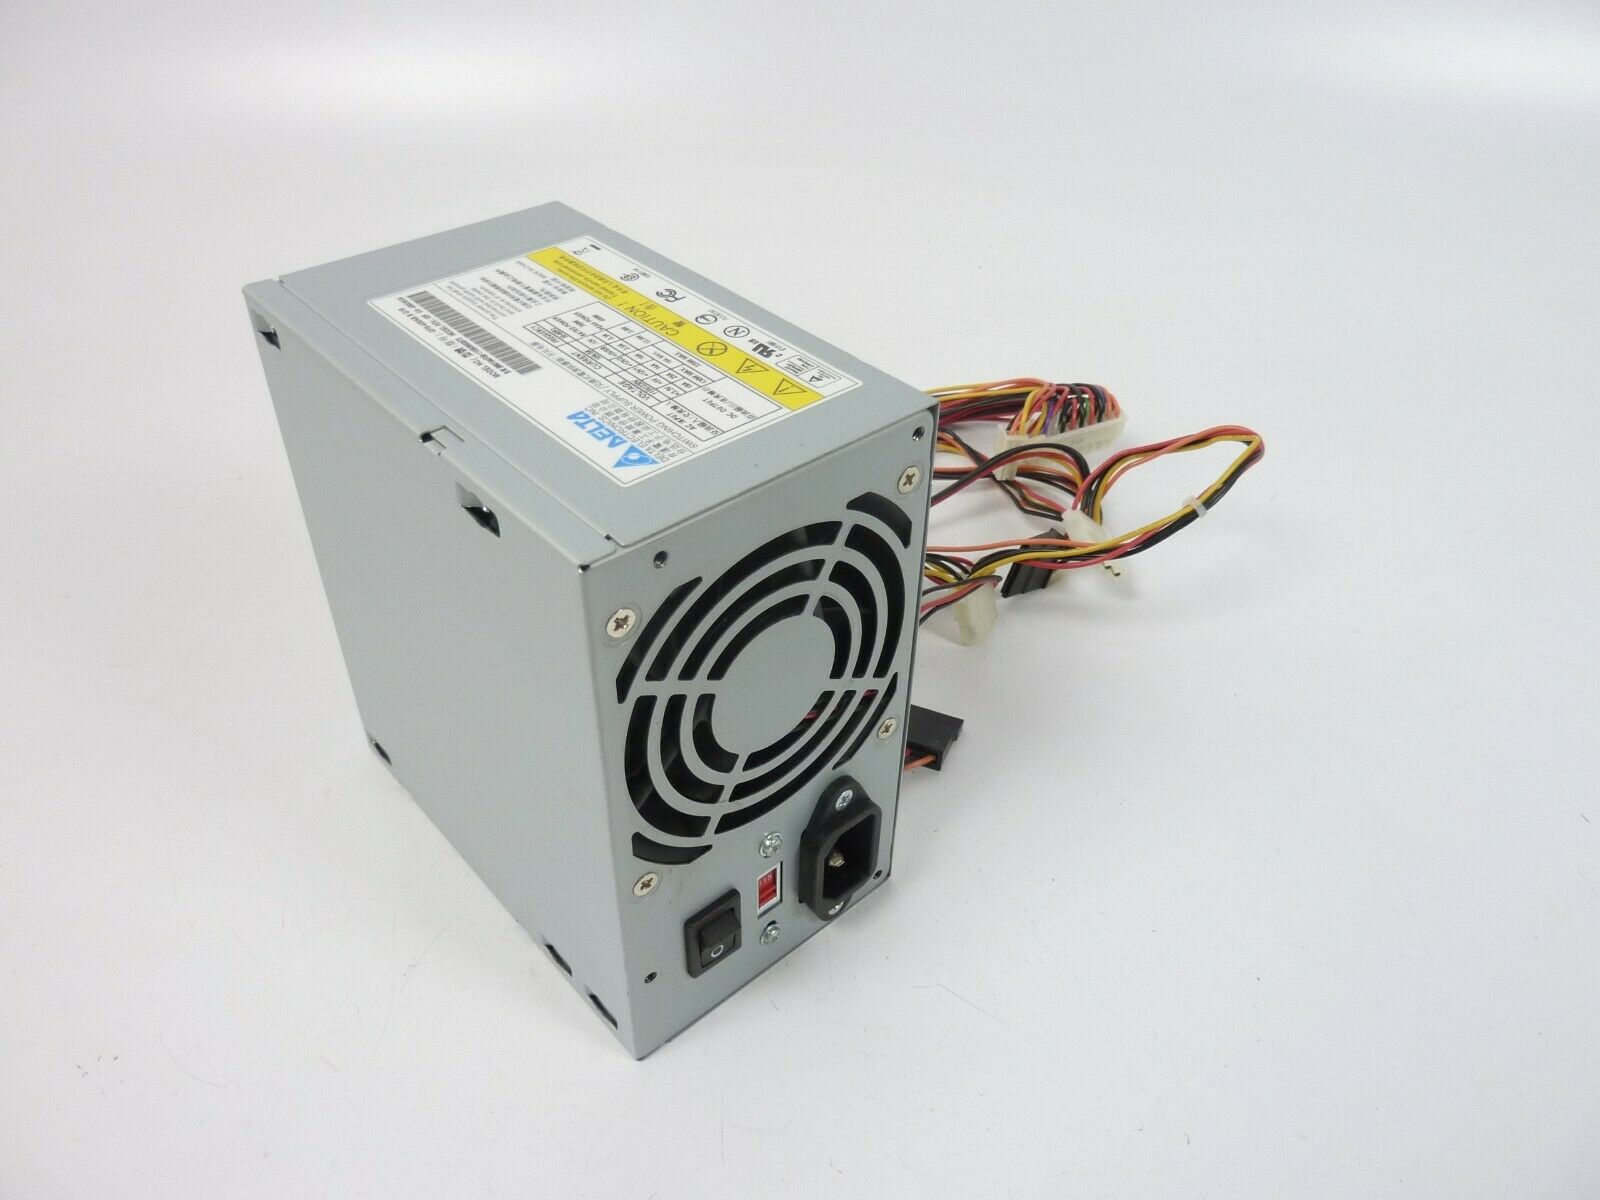 DP 509006-002 Delta Electronics DPS-400AB 400W Power Supply for HP DL120 G7